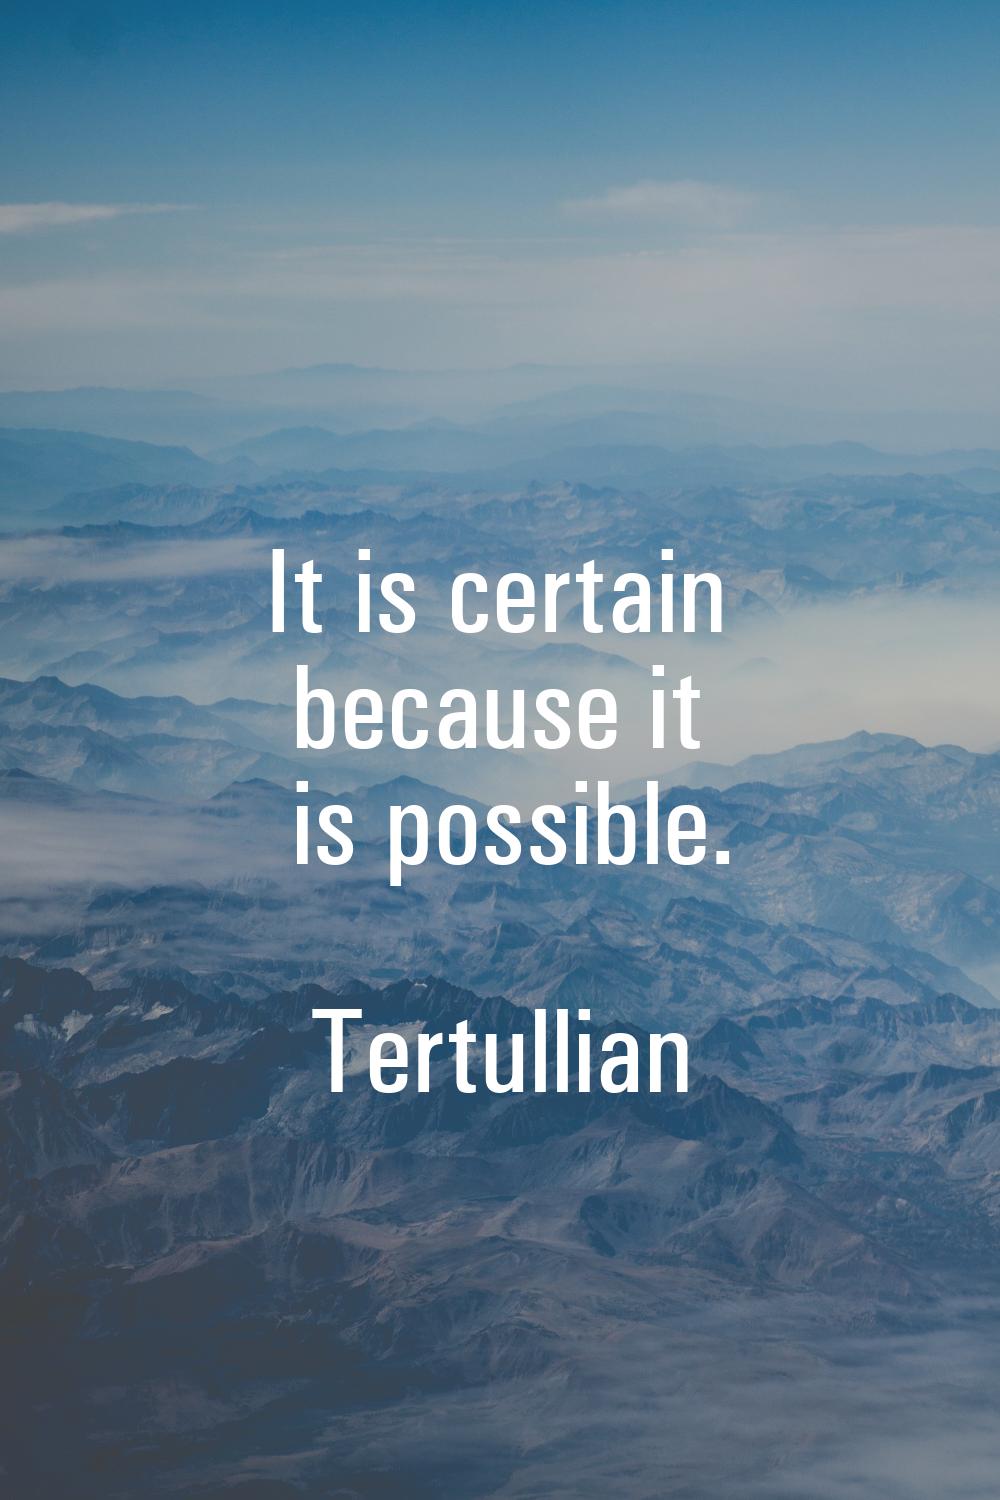 It is certain because it is possible.